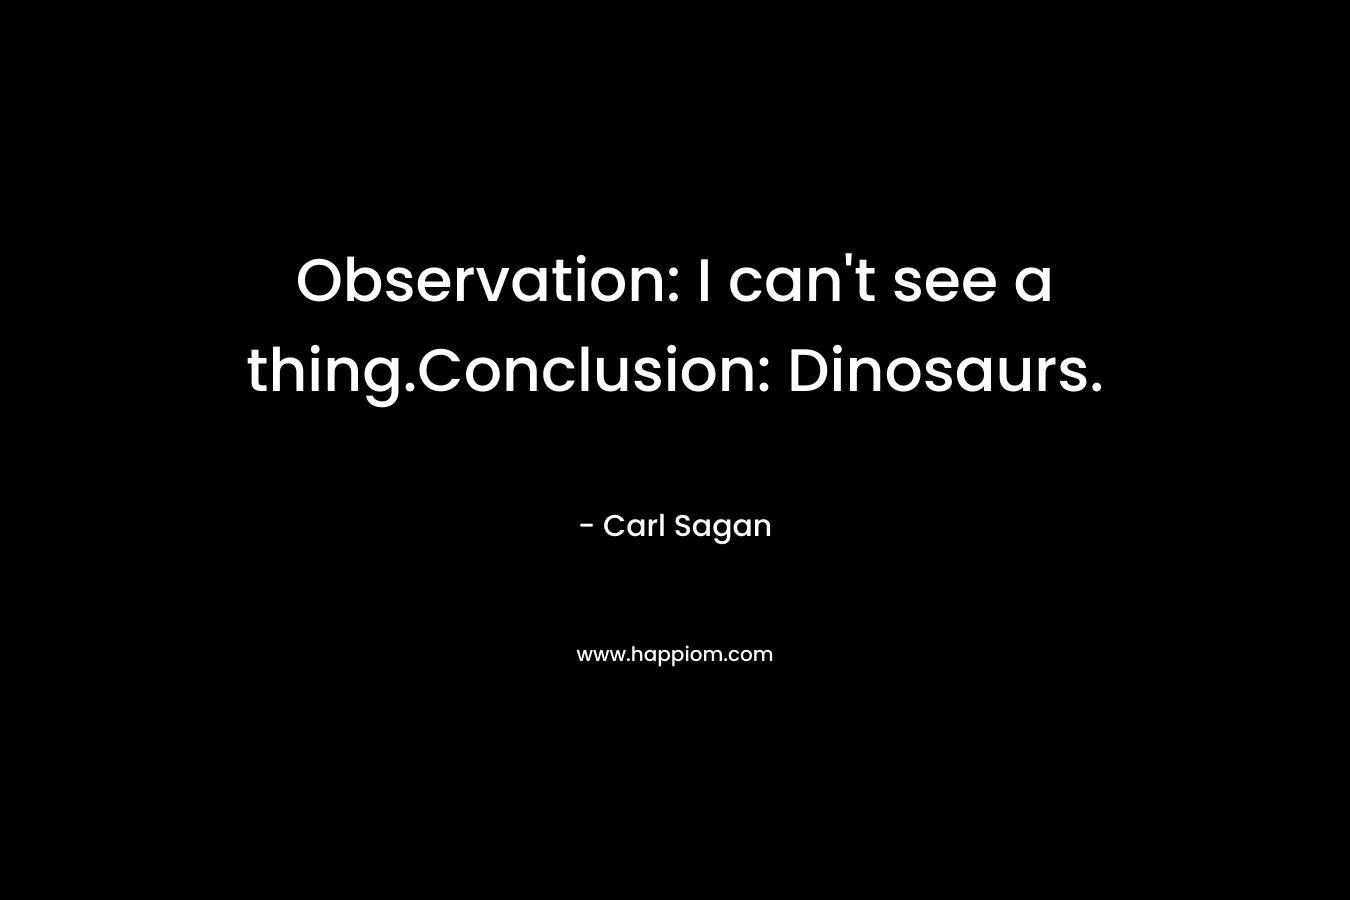 Observation: I can't see a thing.Conclusion: Dinosaurs.